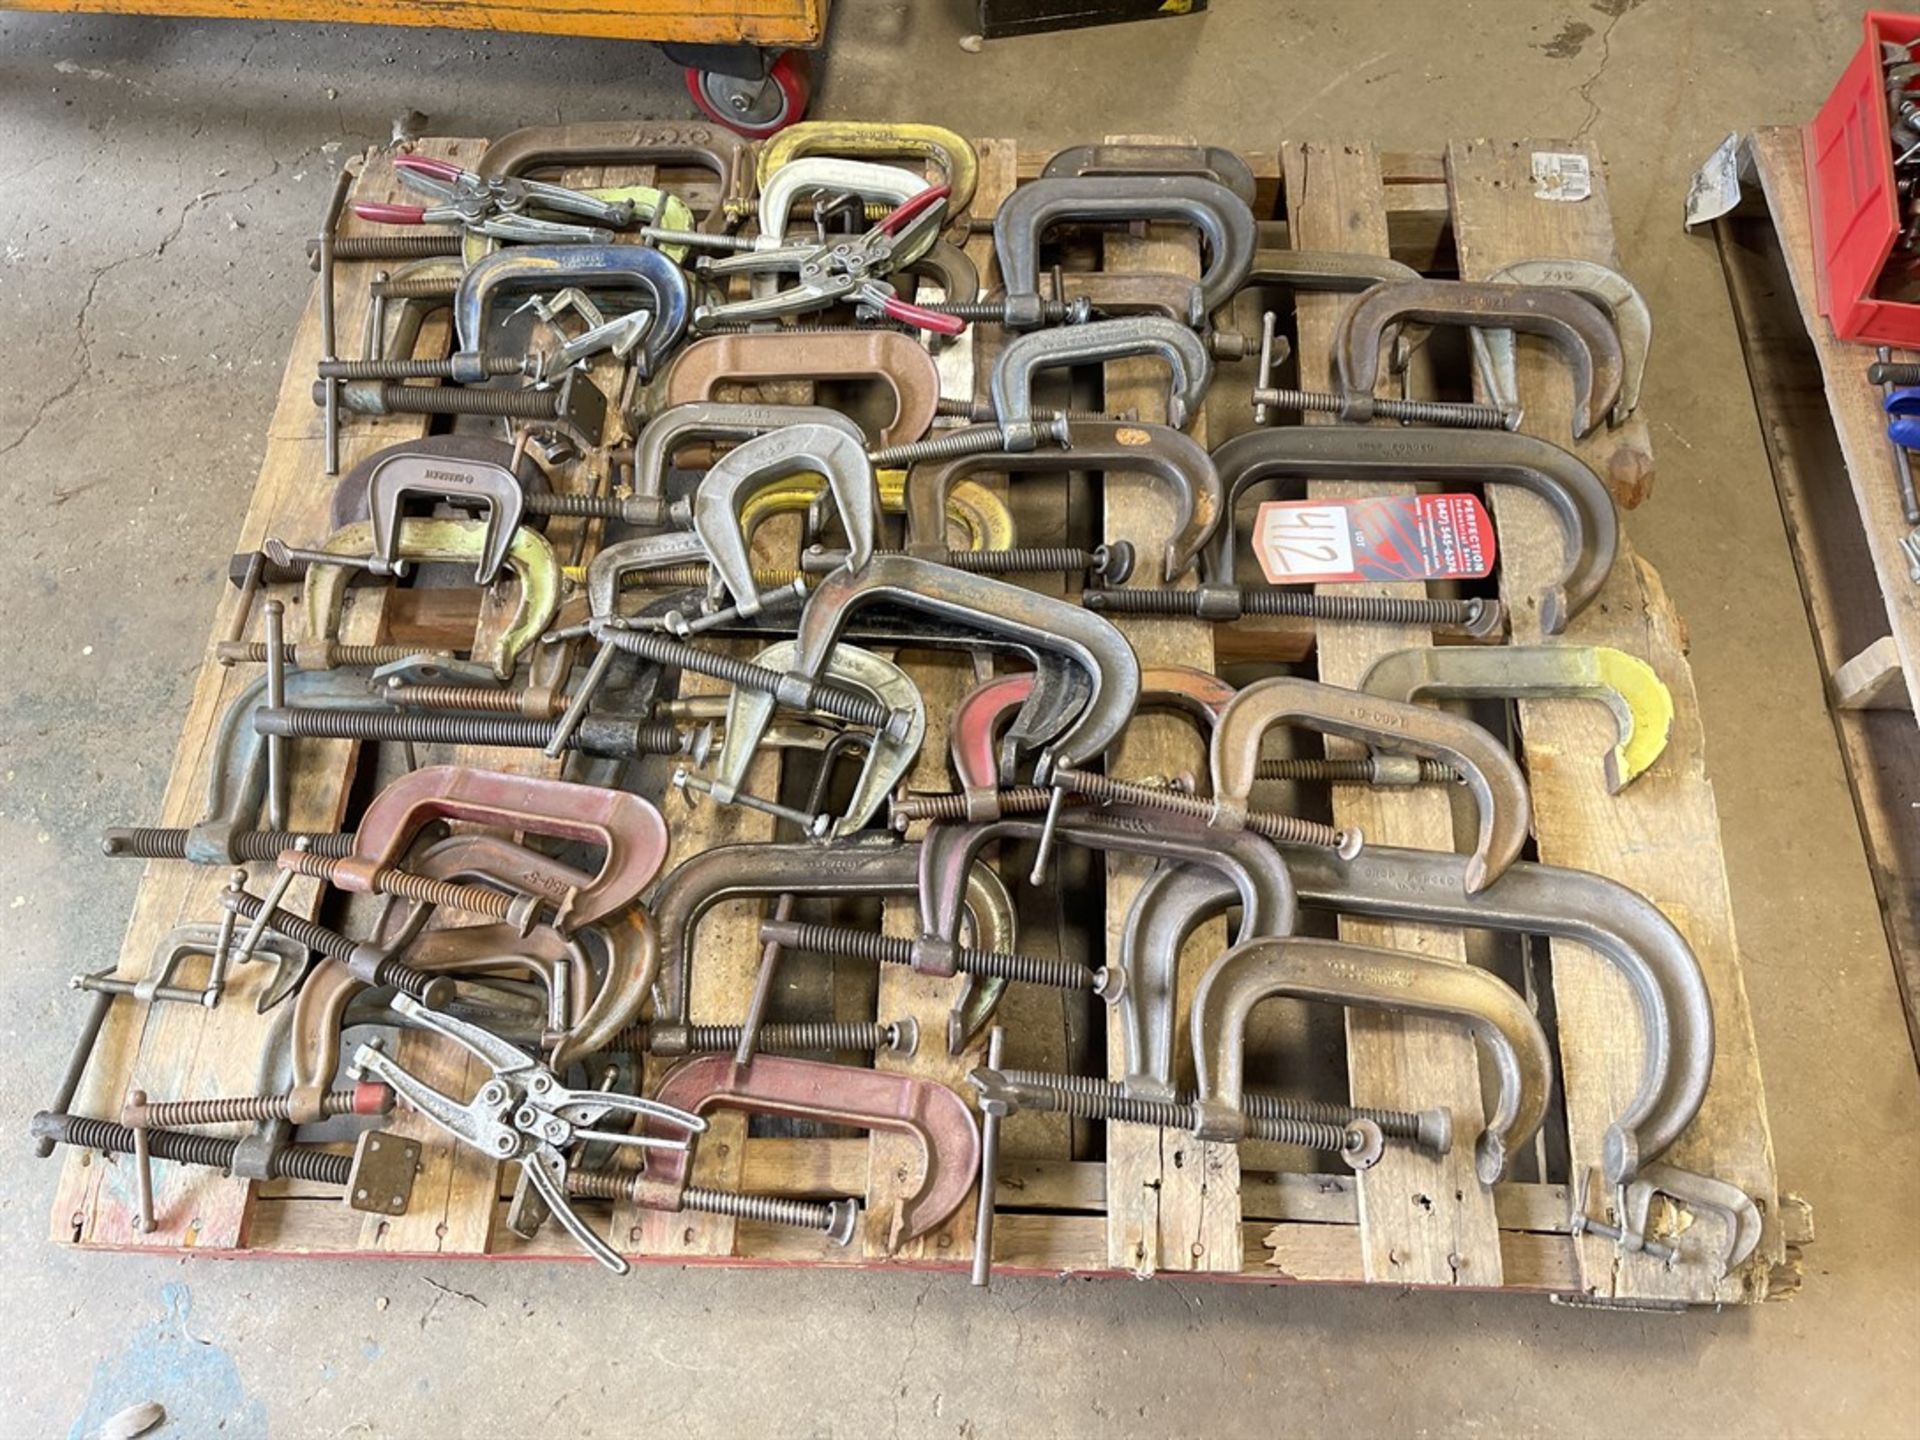 Pallet of Clamps